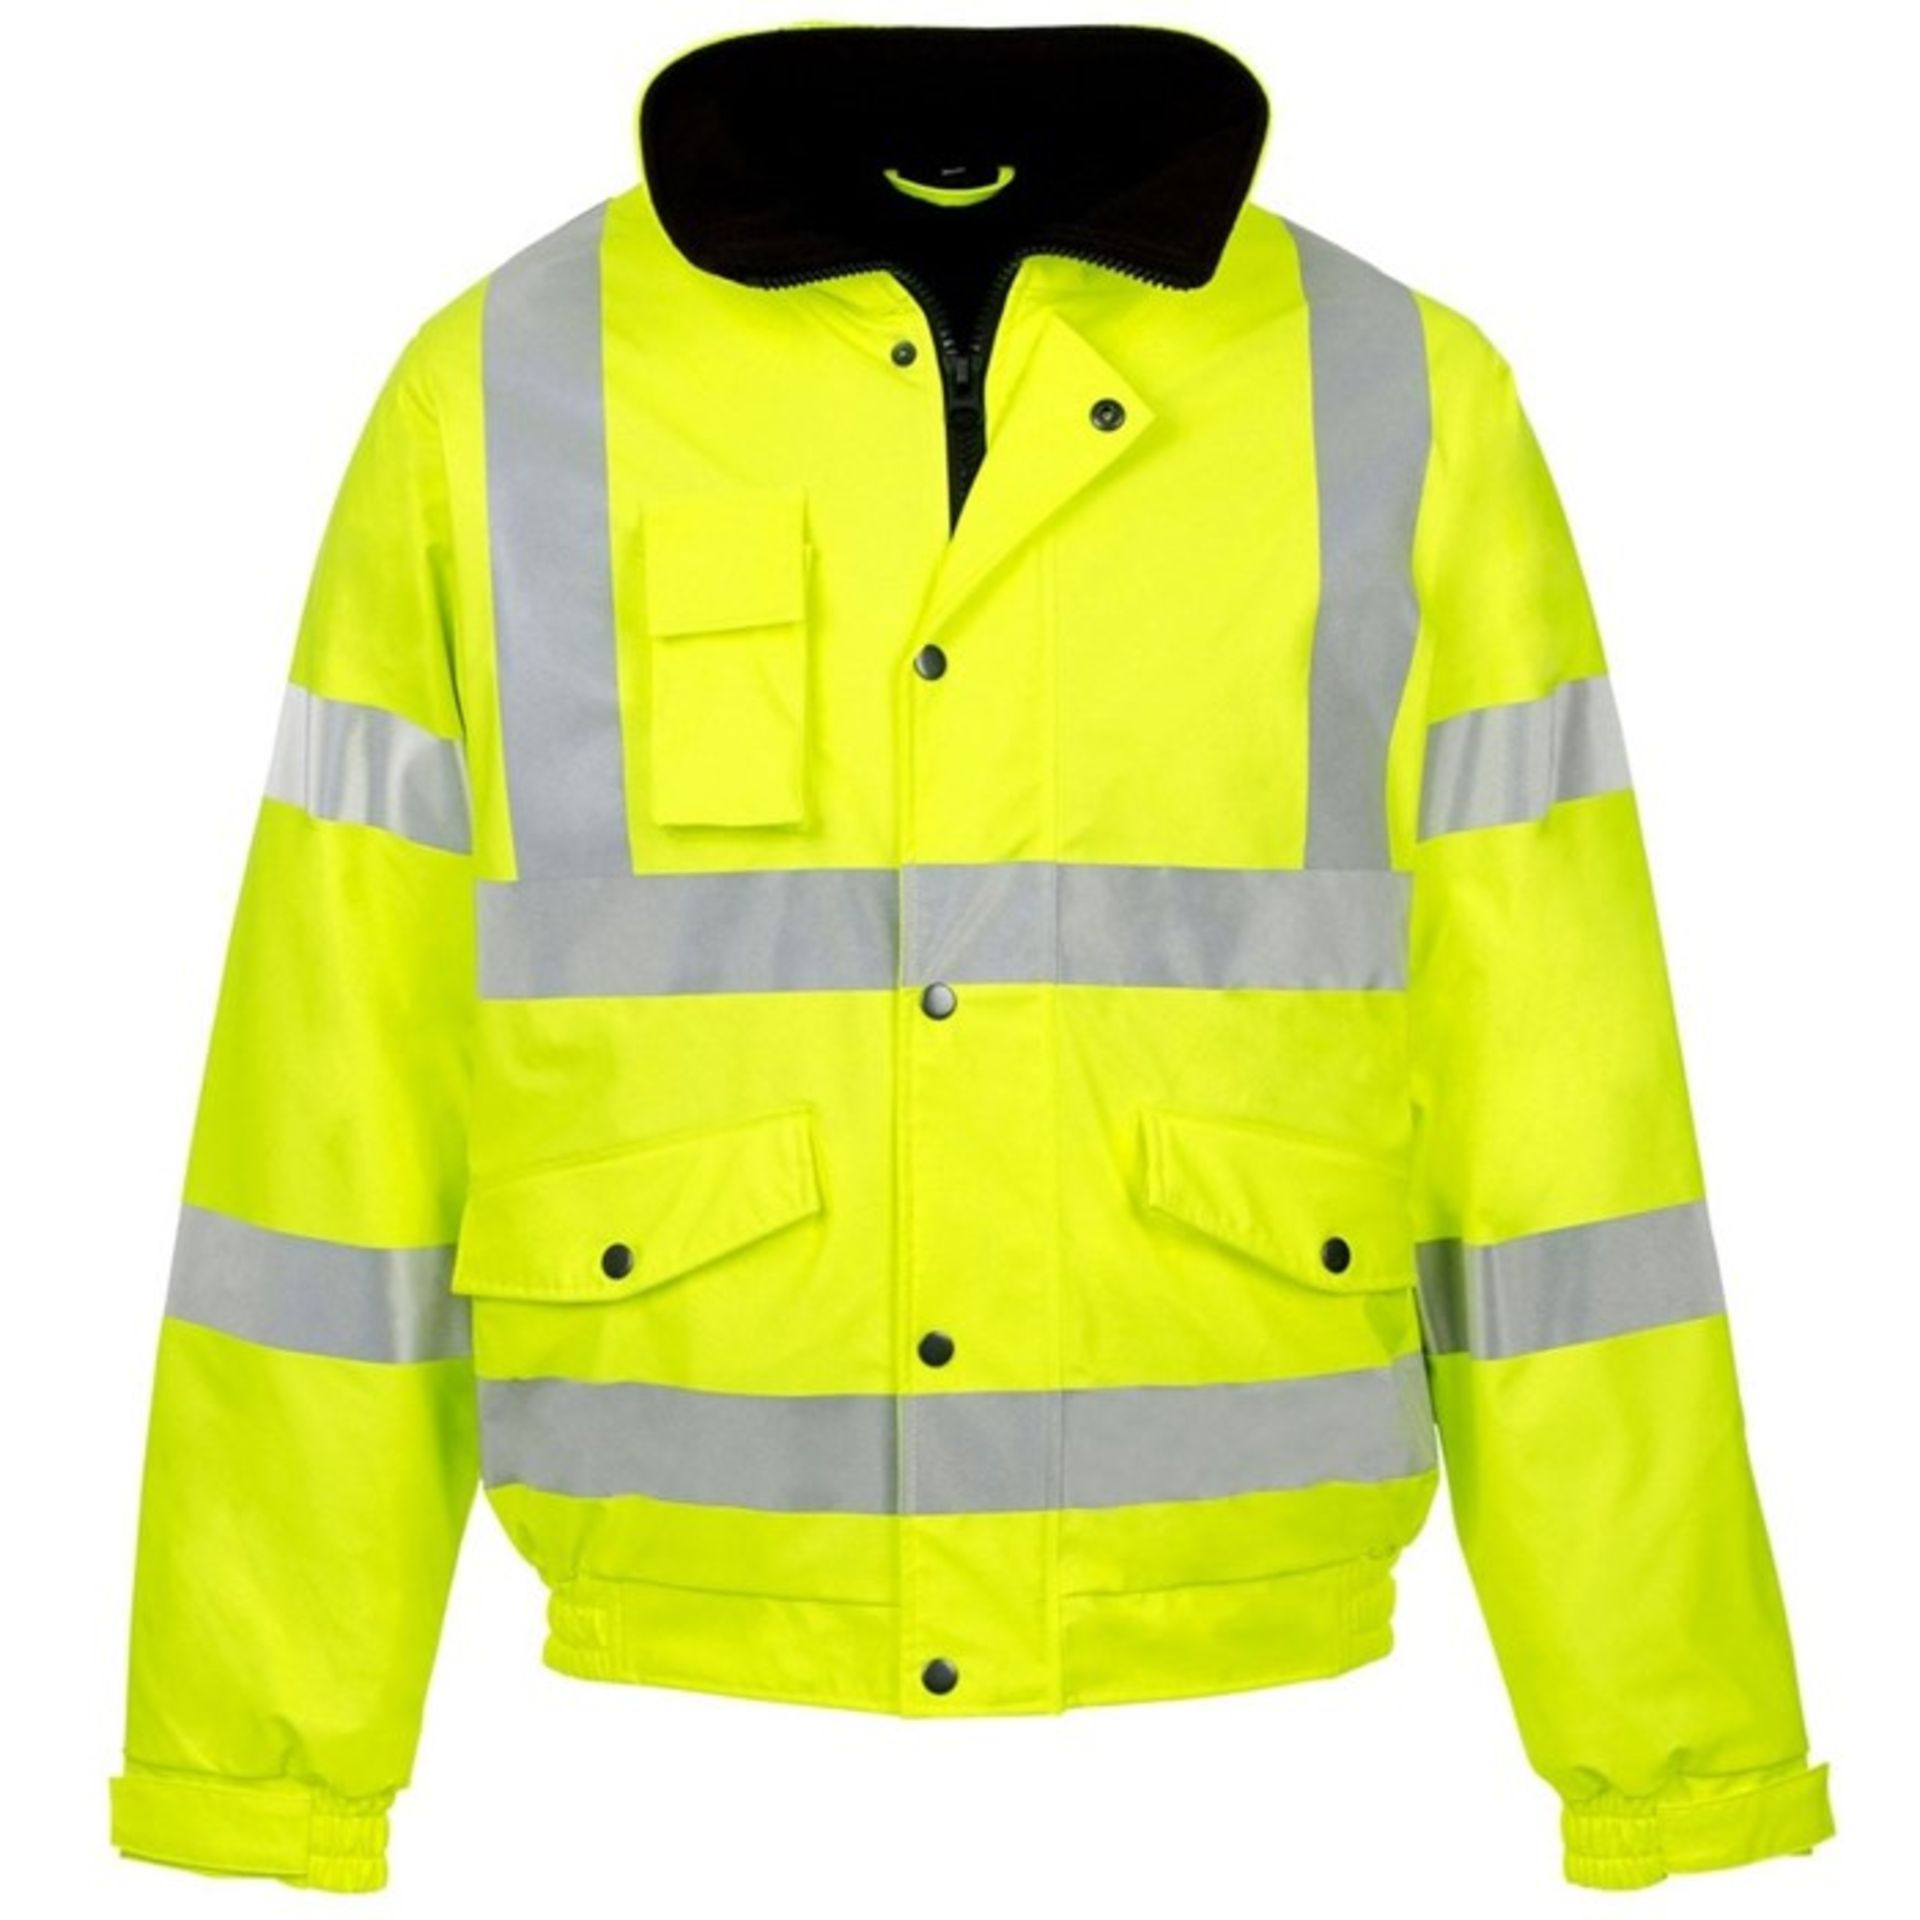 1 AS NEW BAGGED HI-VIS YELLOW CONTRACTOR BOMBER COAT SIZE 5XL (VIEWING HIGHLY RECOMMENDED)